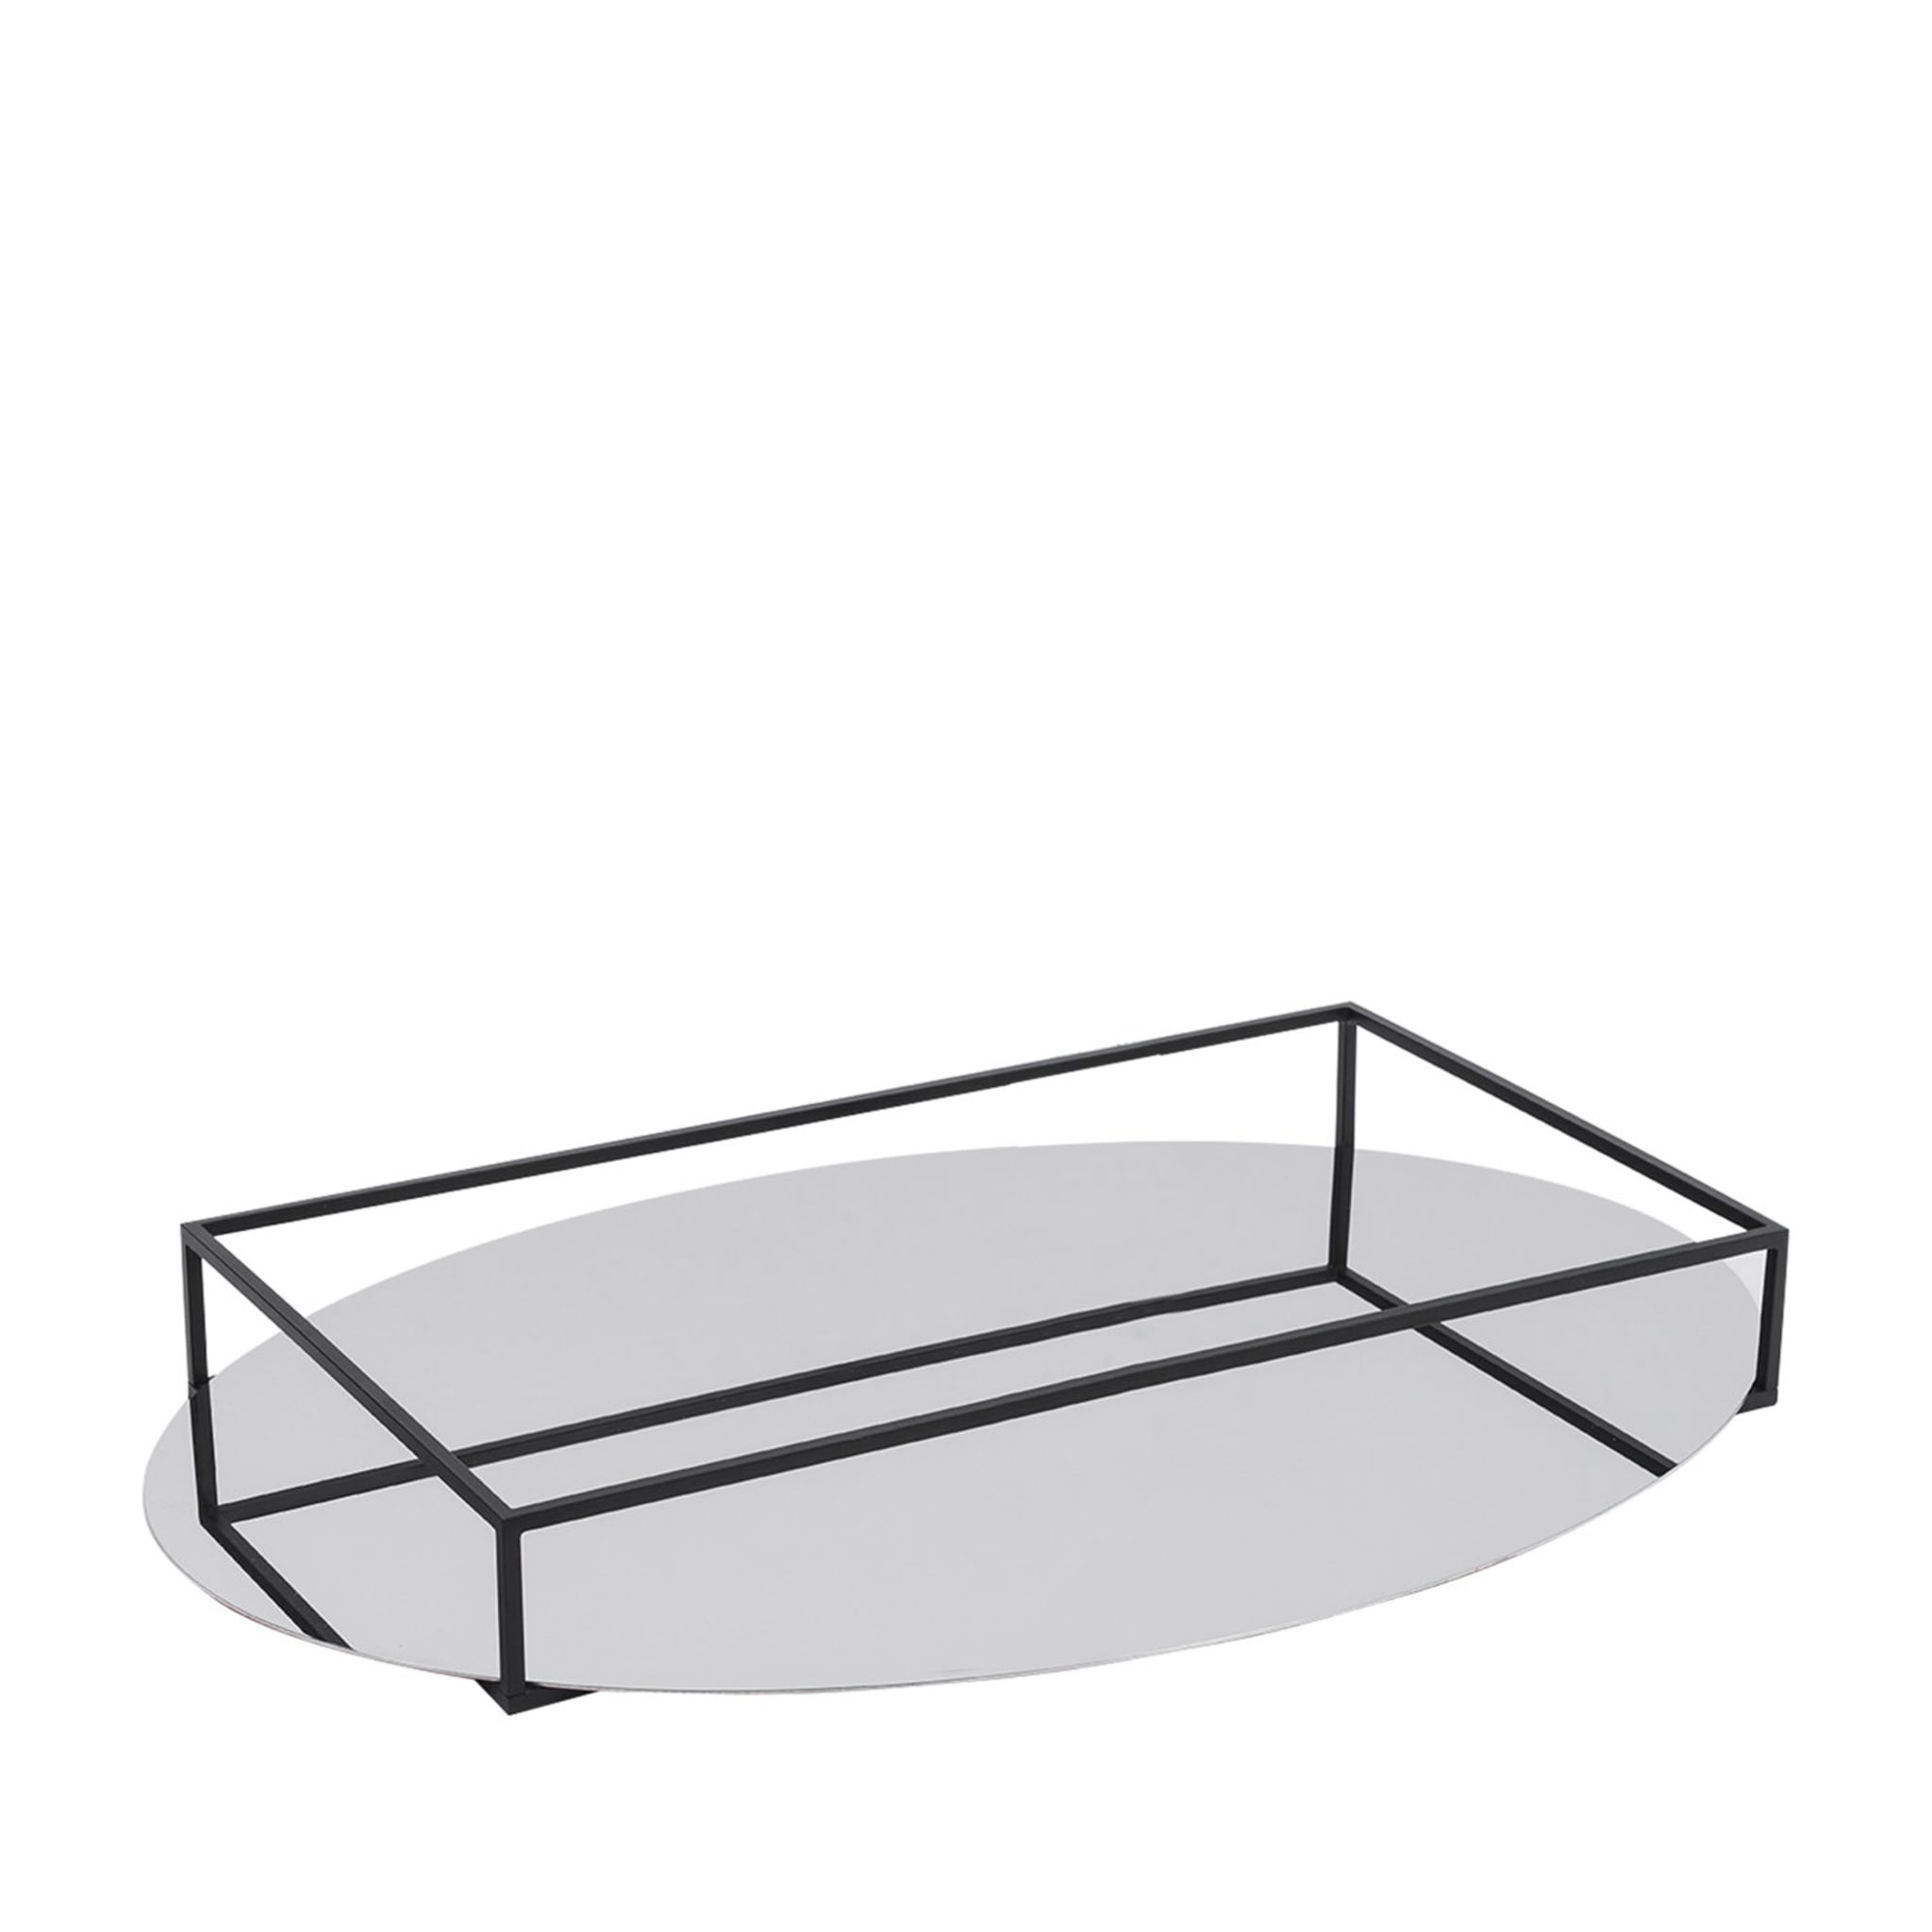 Surface + Border N. 2 Black Fruit Tray by Ron Gilad - Main view